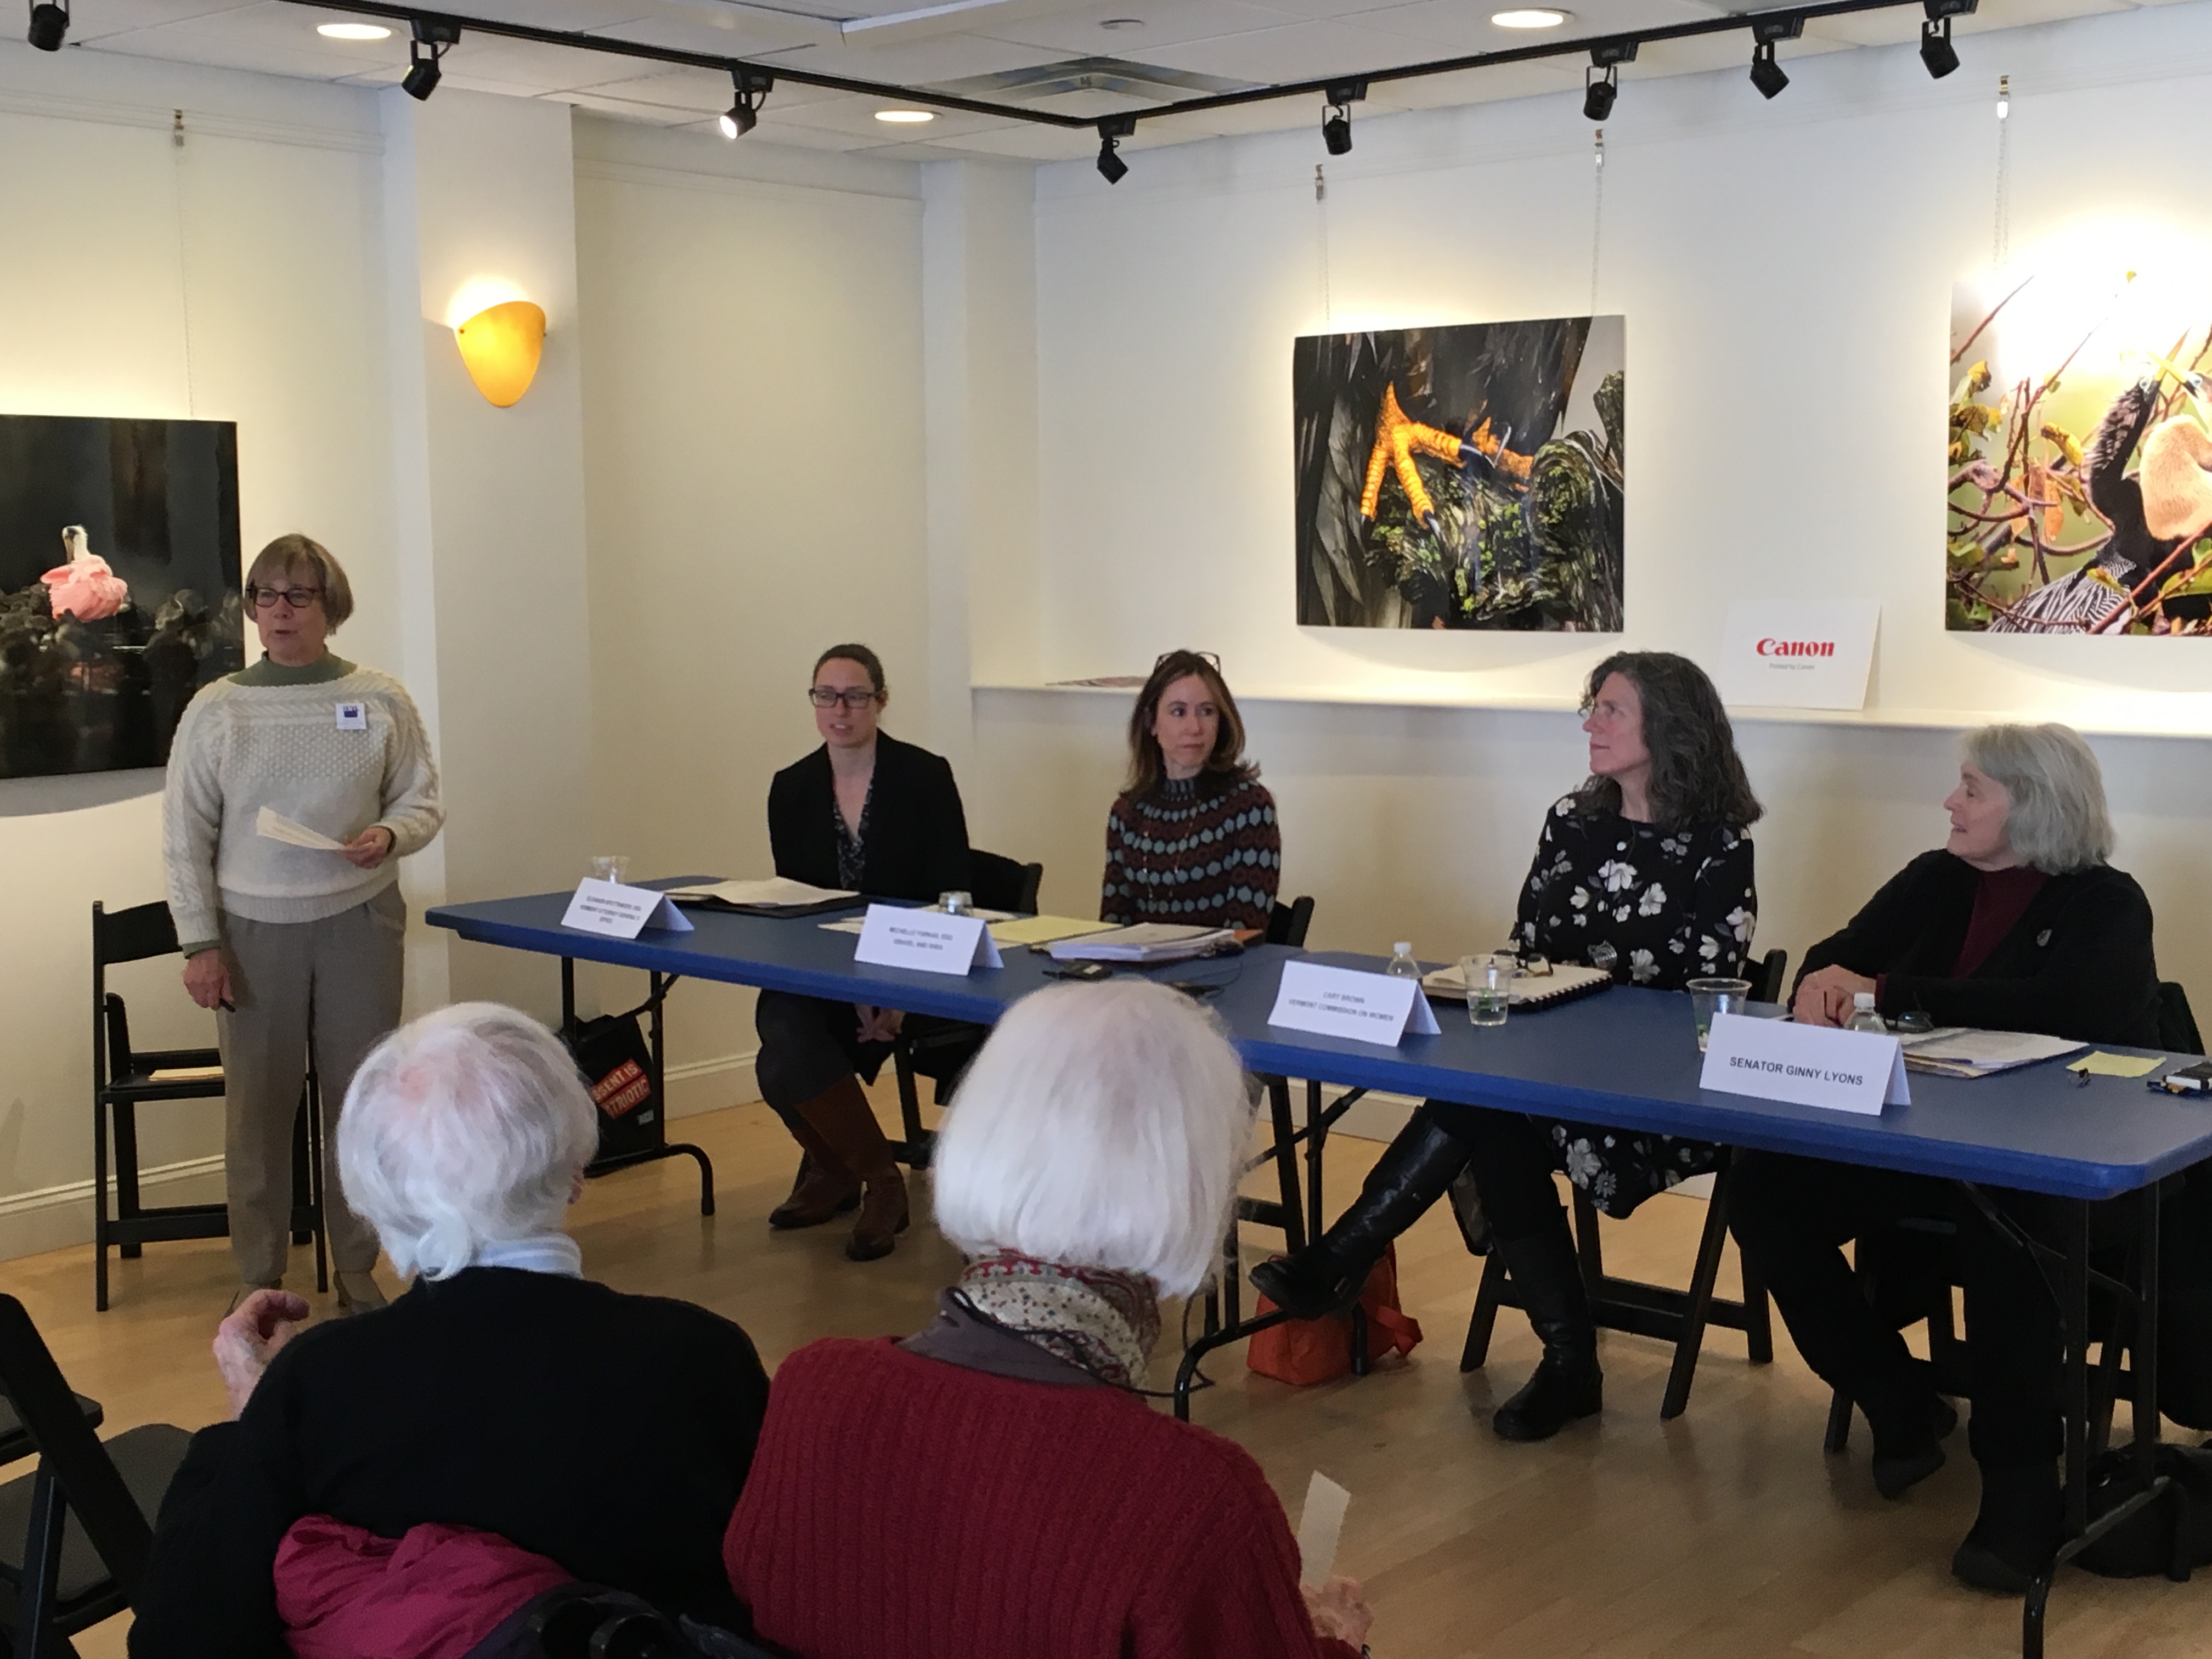 Introducing Panel to discuss an inclusive equal rights amendment to the Vermont constitution